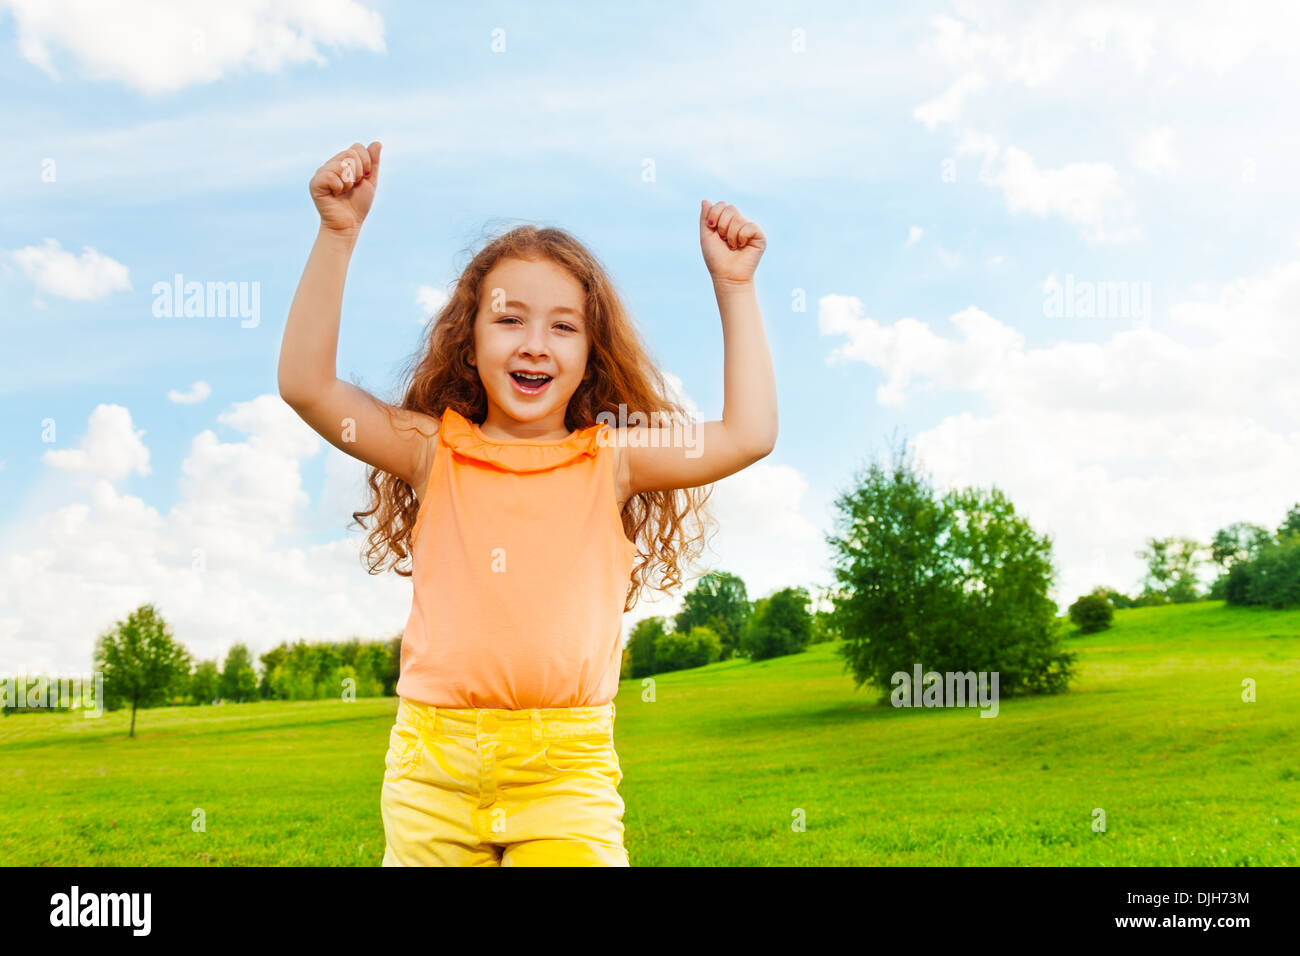 Happy little girl with long hair and lifted hands standing in the park Stock Photo